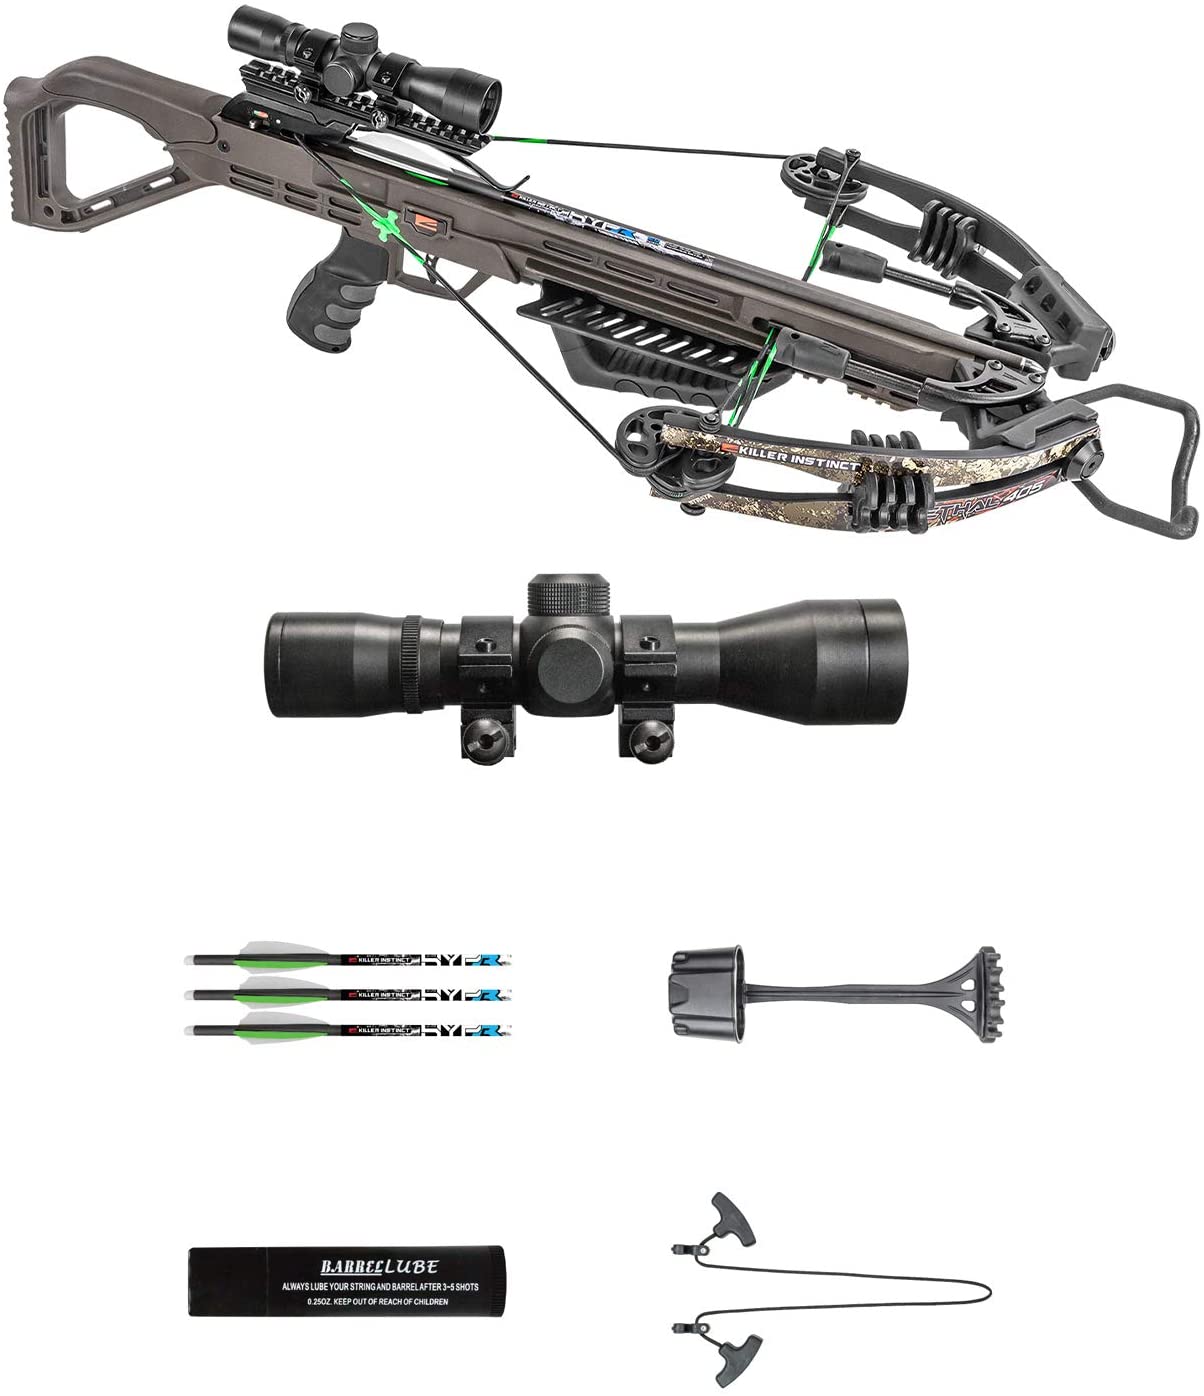 Killer Instinct - LETHAL 405 Crossbow Pro Package with 4 x 32 Non-Illuminated Scope, Rope Cocker, String Suppressors, 3-Bolt Quiver, 3 HYPR Lite Bolts and Field Tips